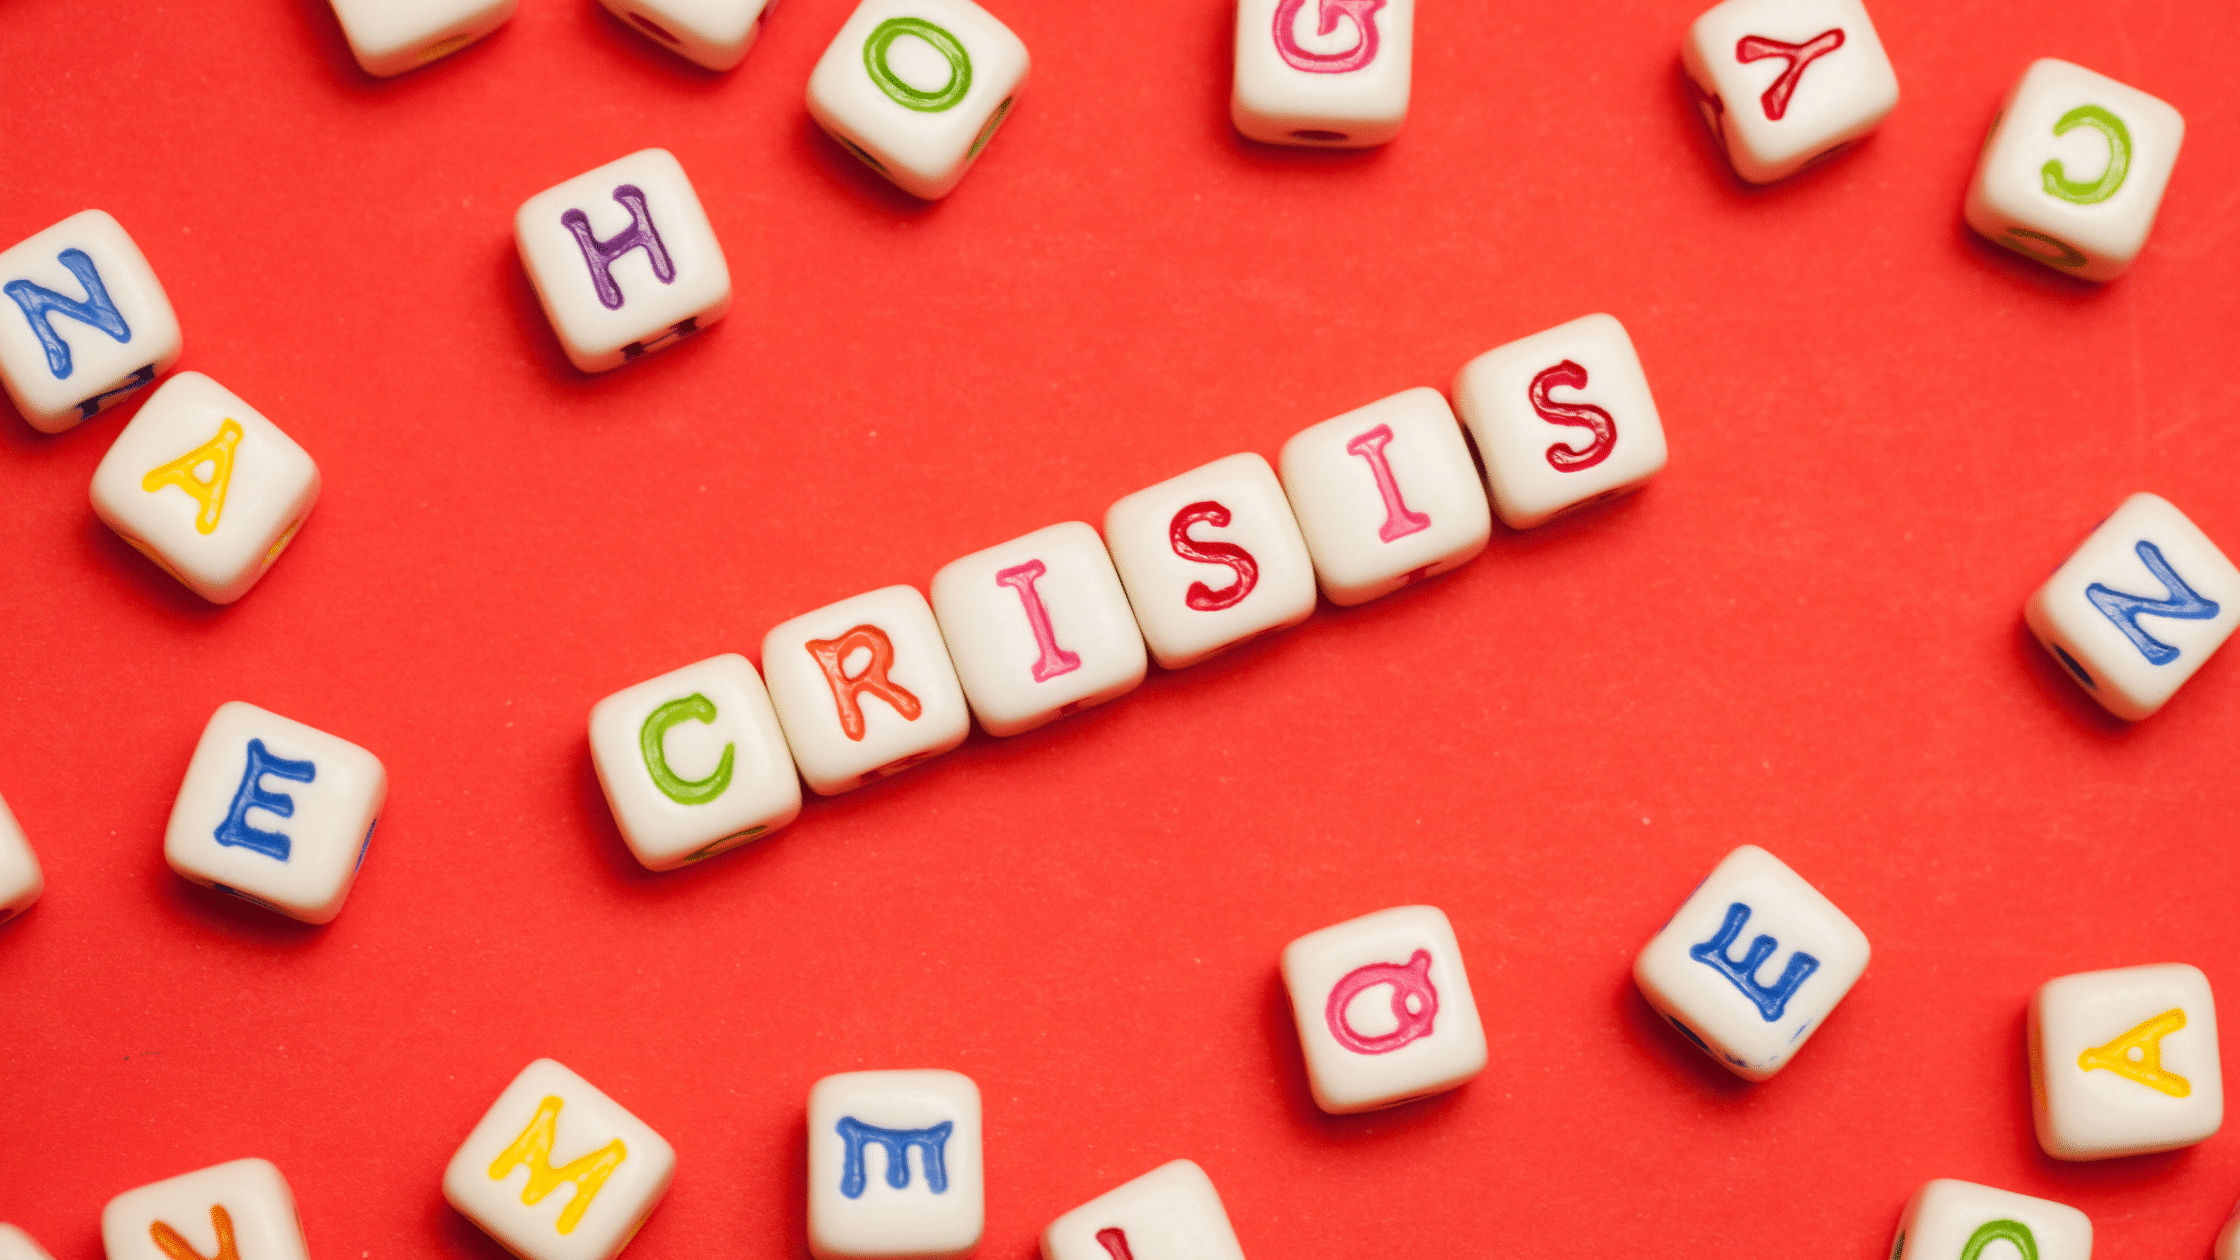 Crisis Spelled Out In Letters On A Red Background